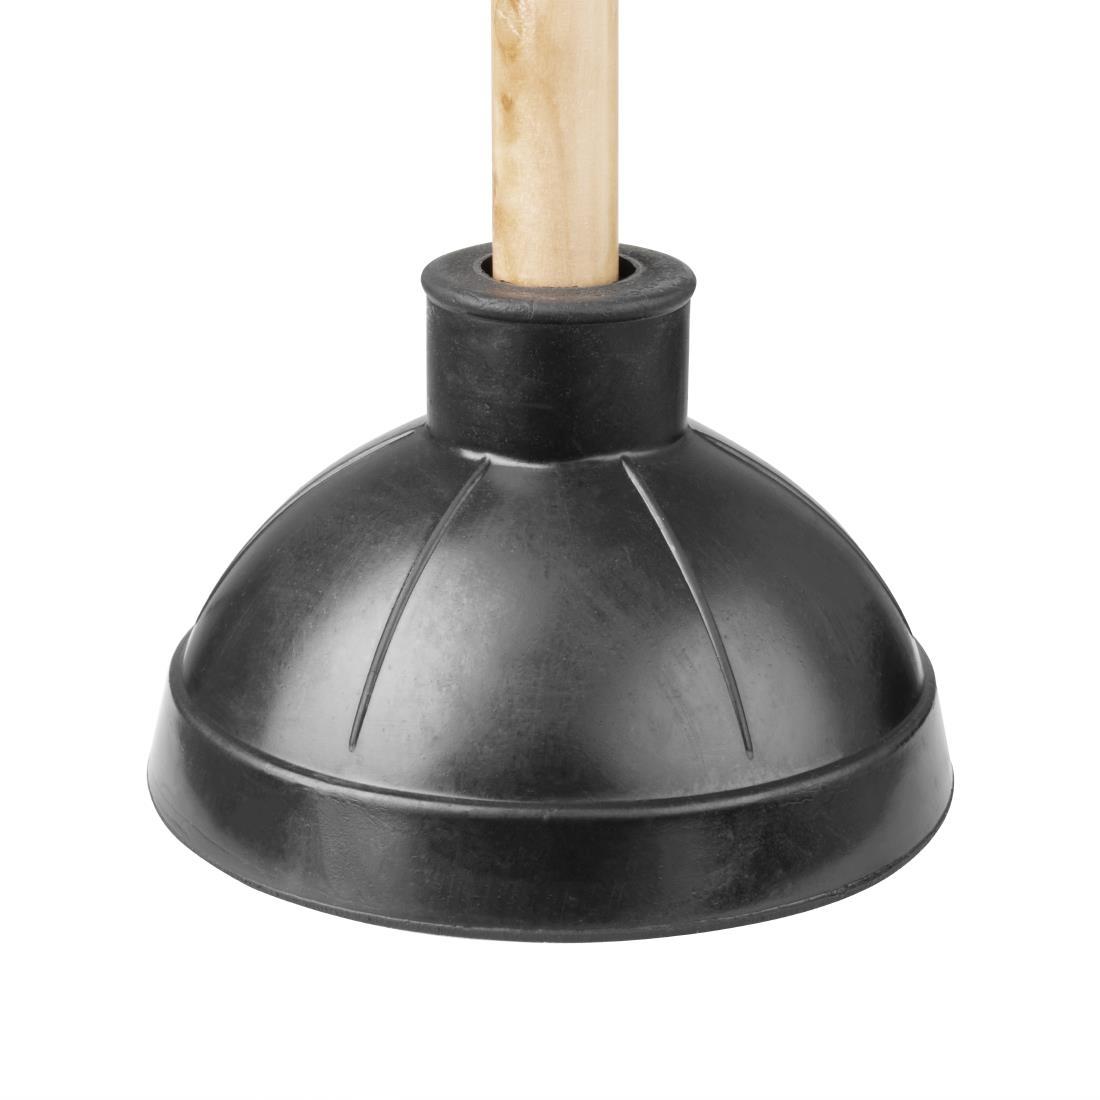 Jantex Plunger With Wooden Handle - CG047  - 4